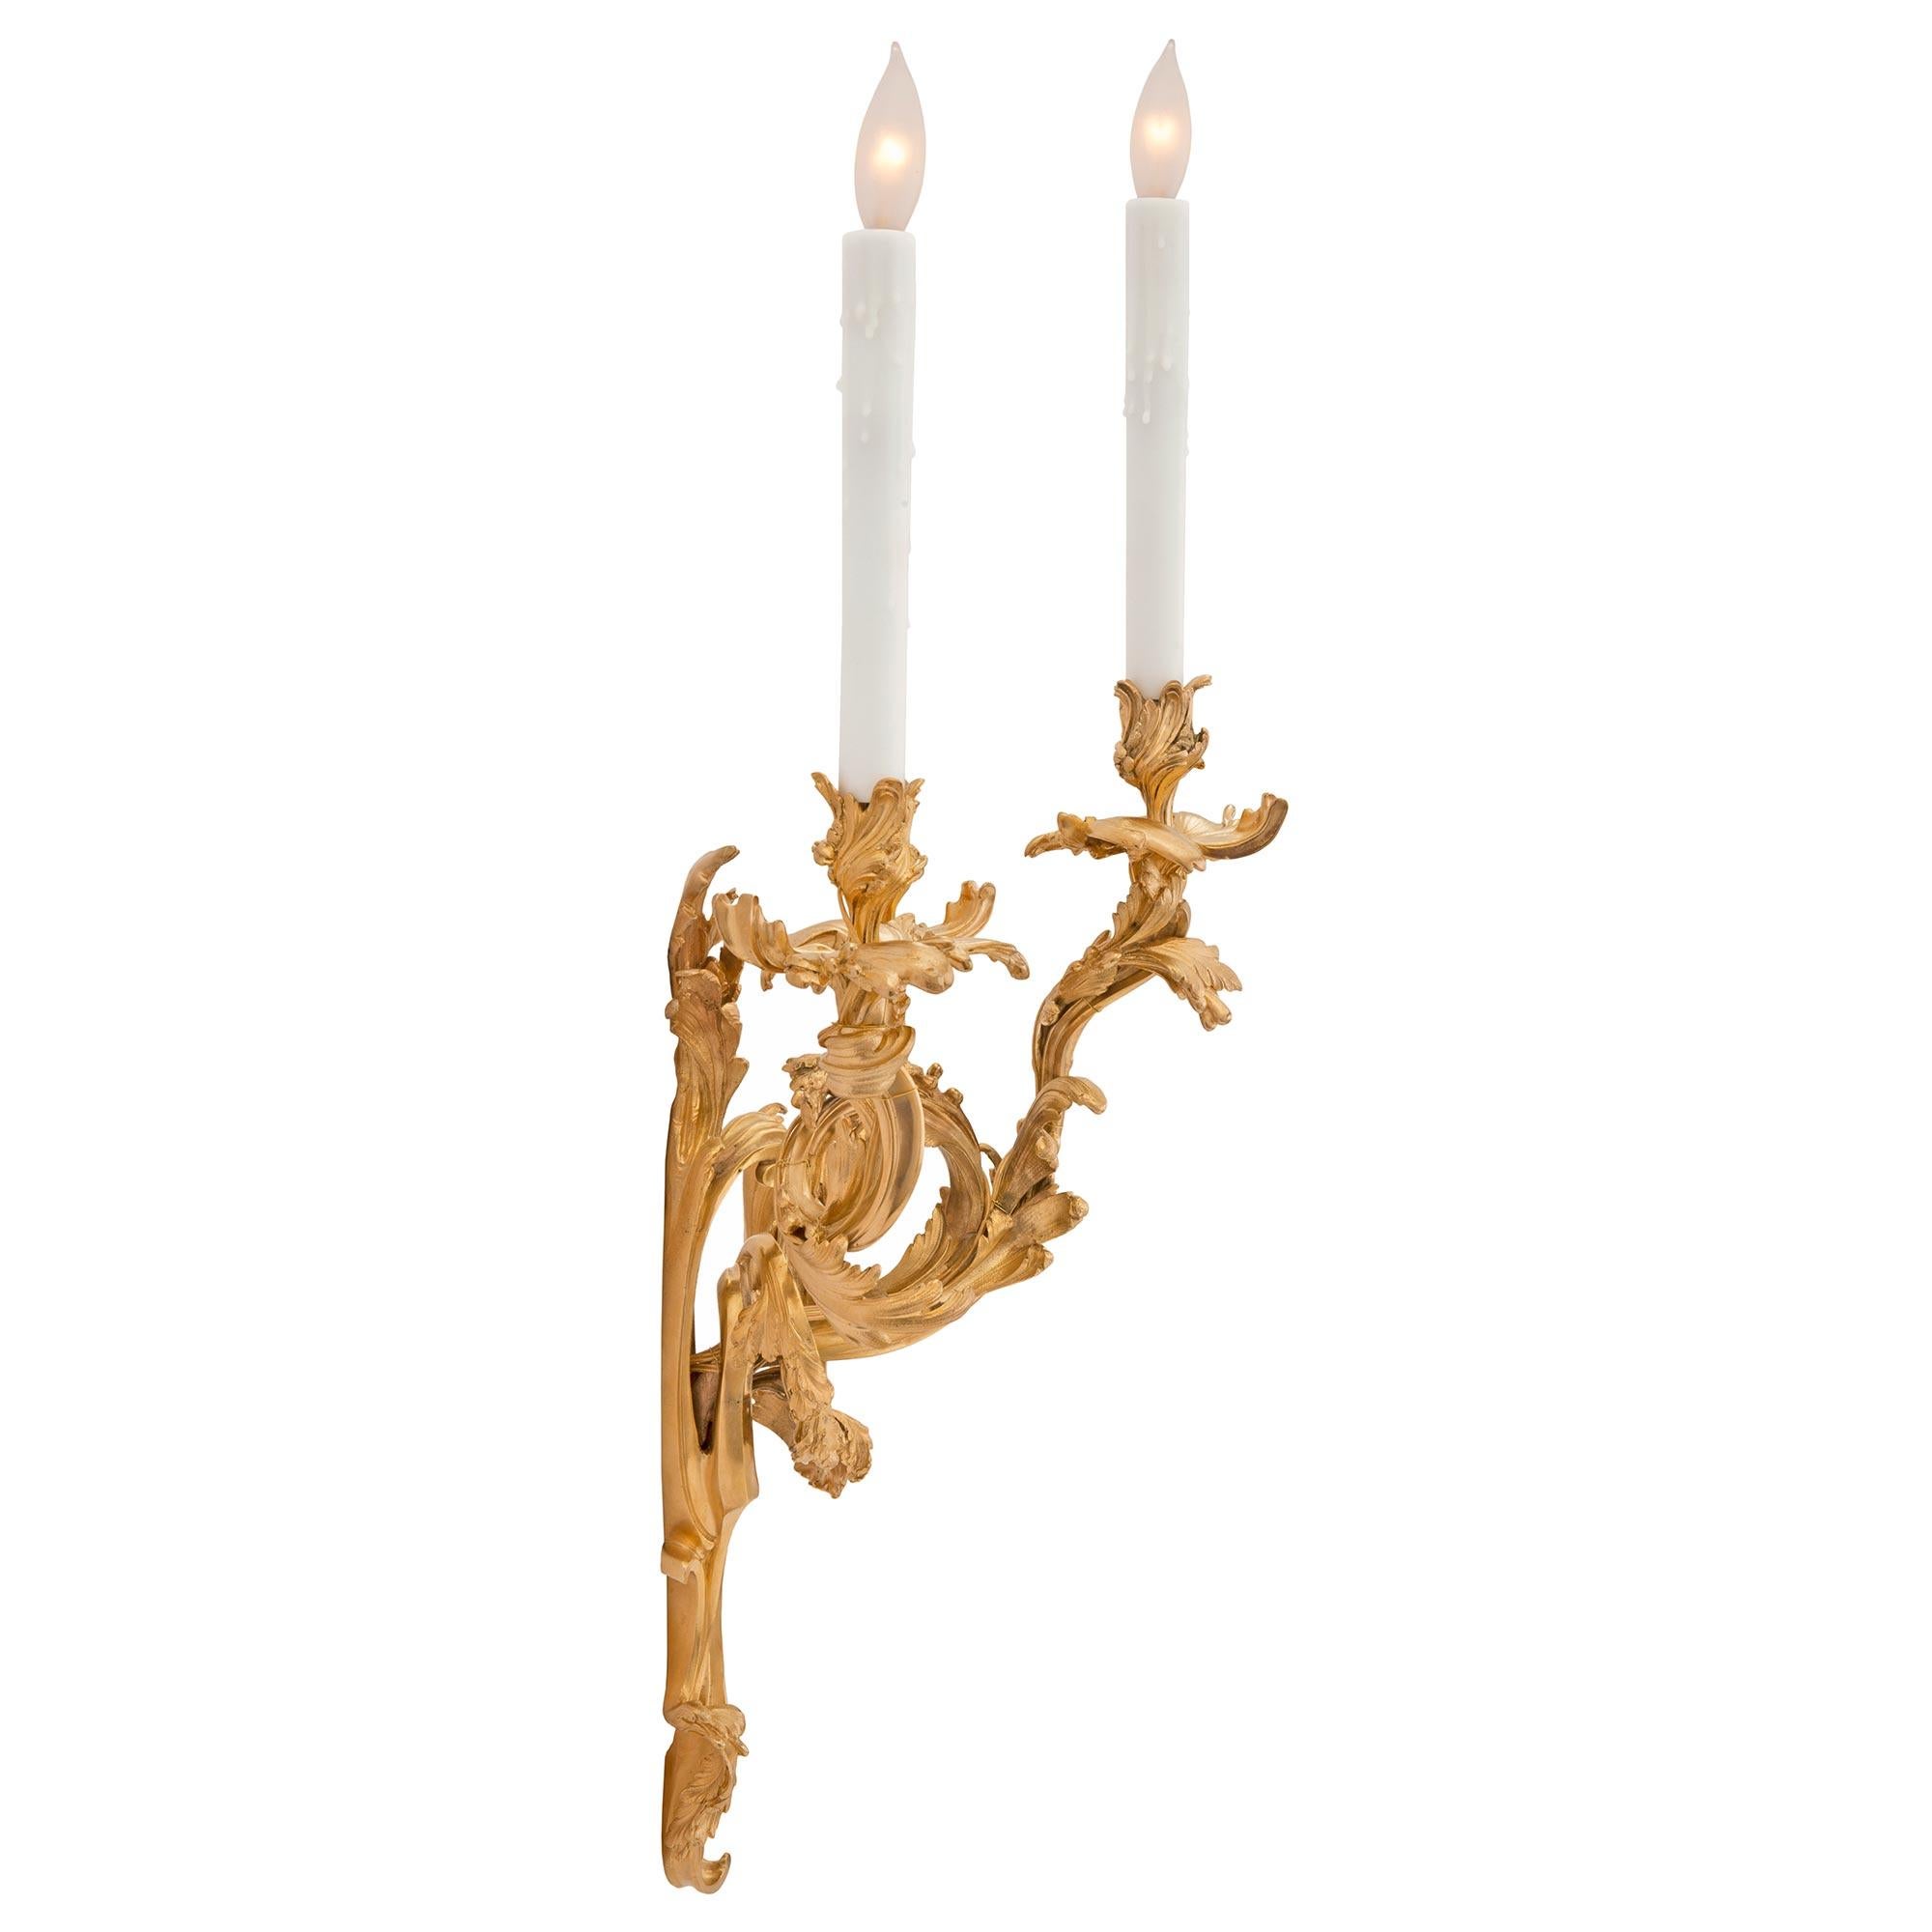 Pair of French Mid 19th Century Louis XV St. Ormolu Sconces In Good Condition For Sale In West Palm Beach, FL